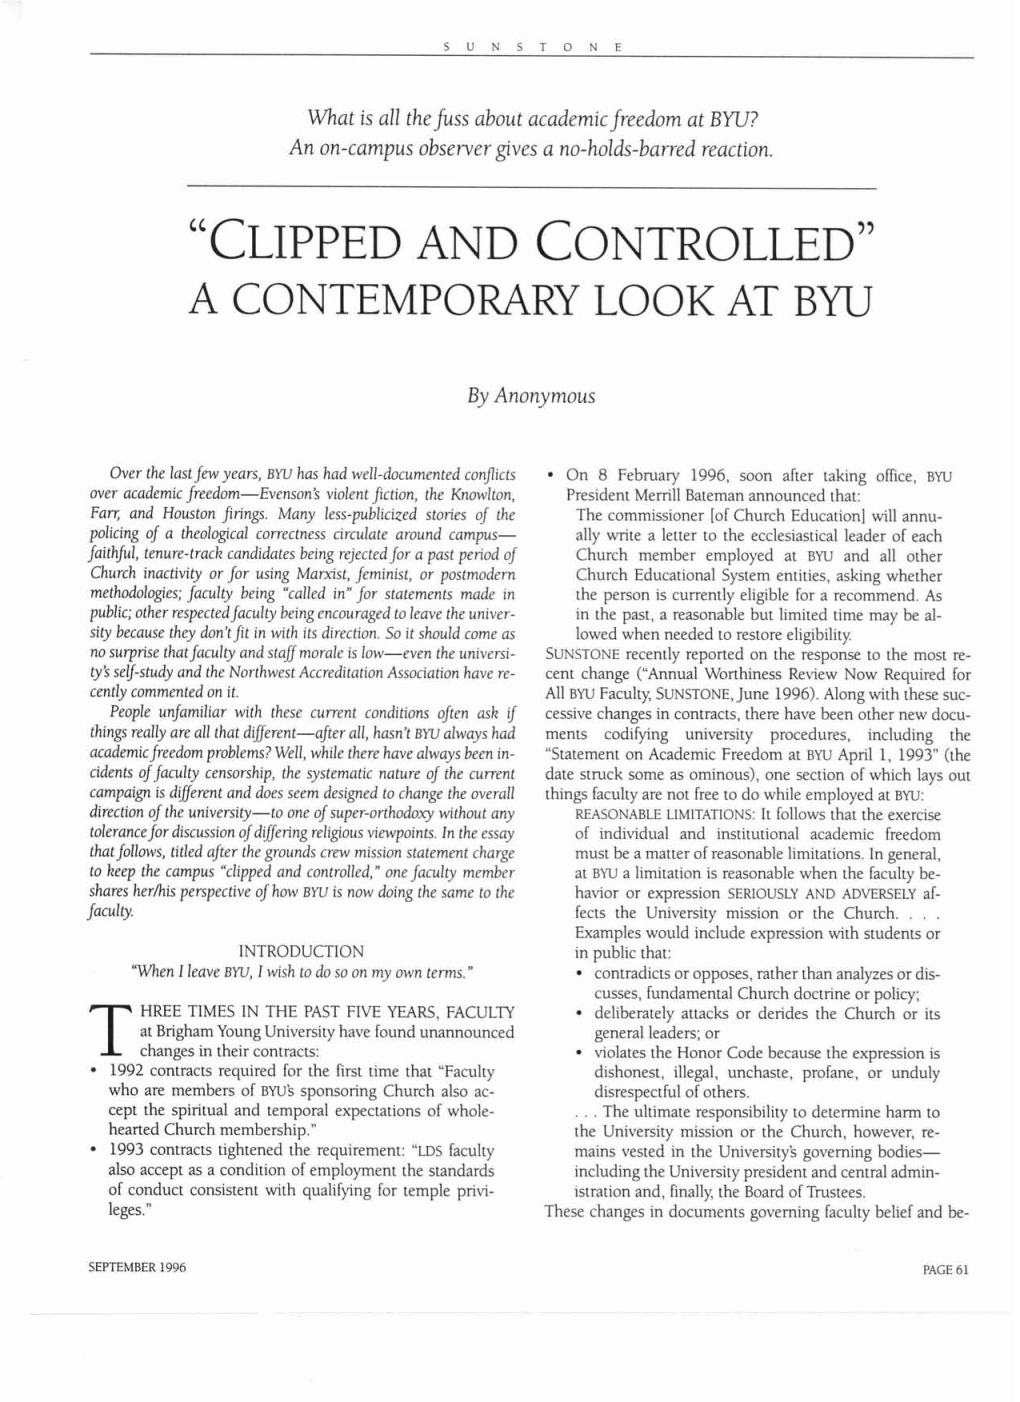 "Clipped and Controlled"